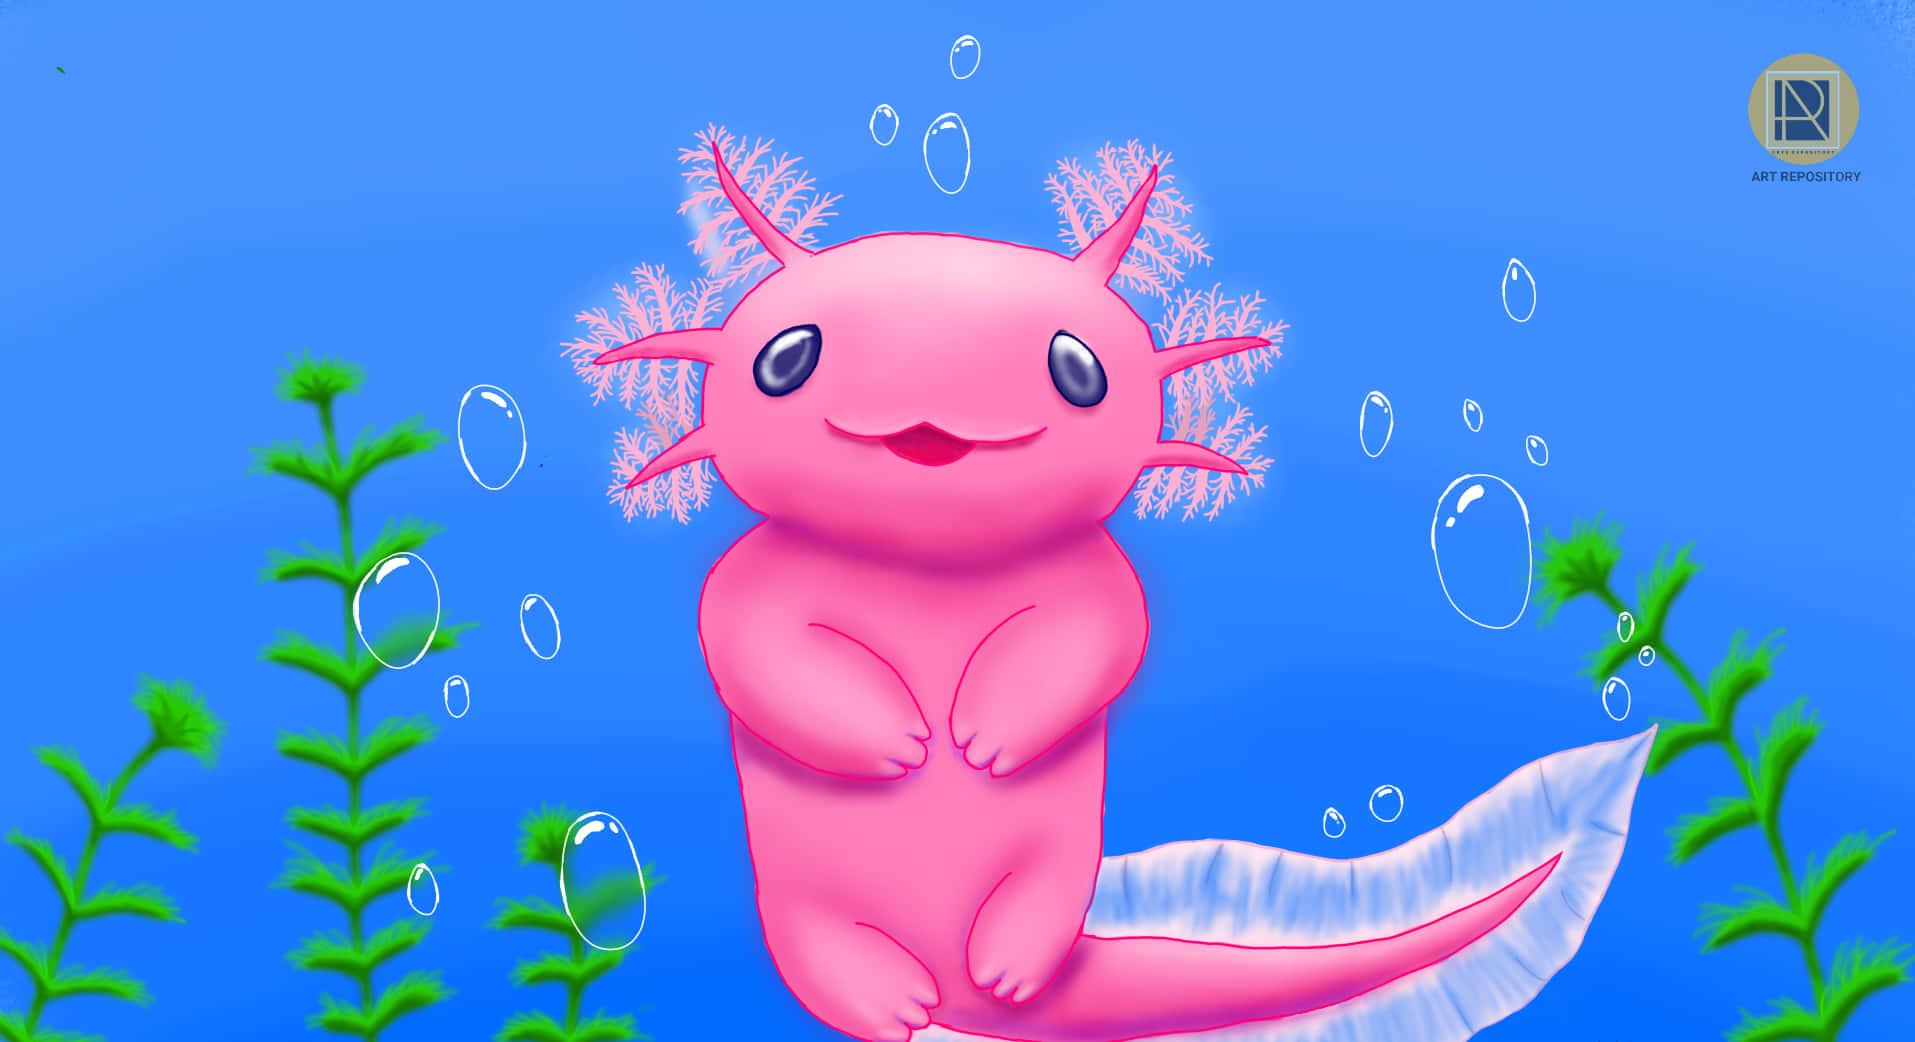 "Welcome to the wondrous world of Axolotls"